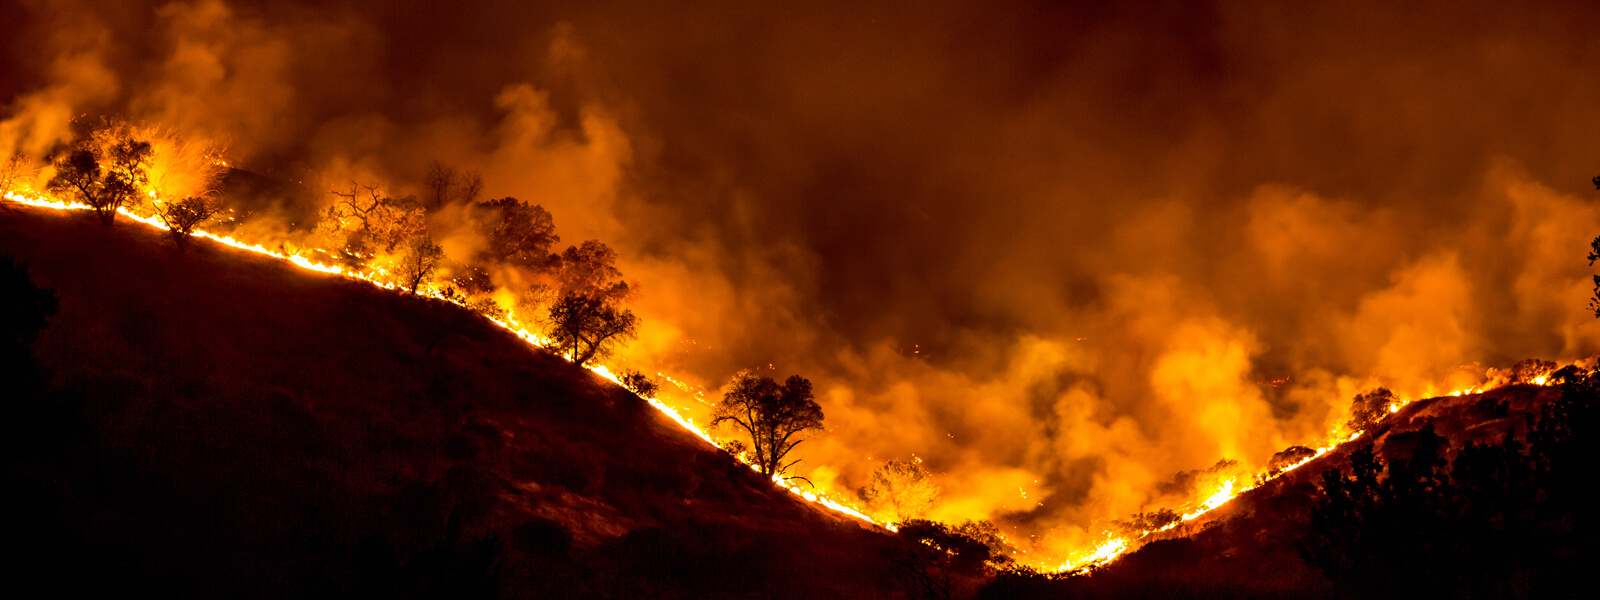 Firenadoes and drifting embers: The secrets of extreme wildfires